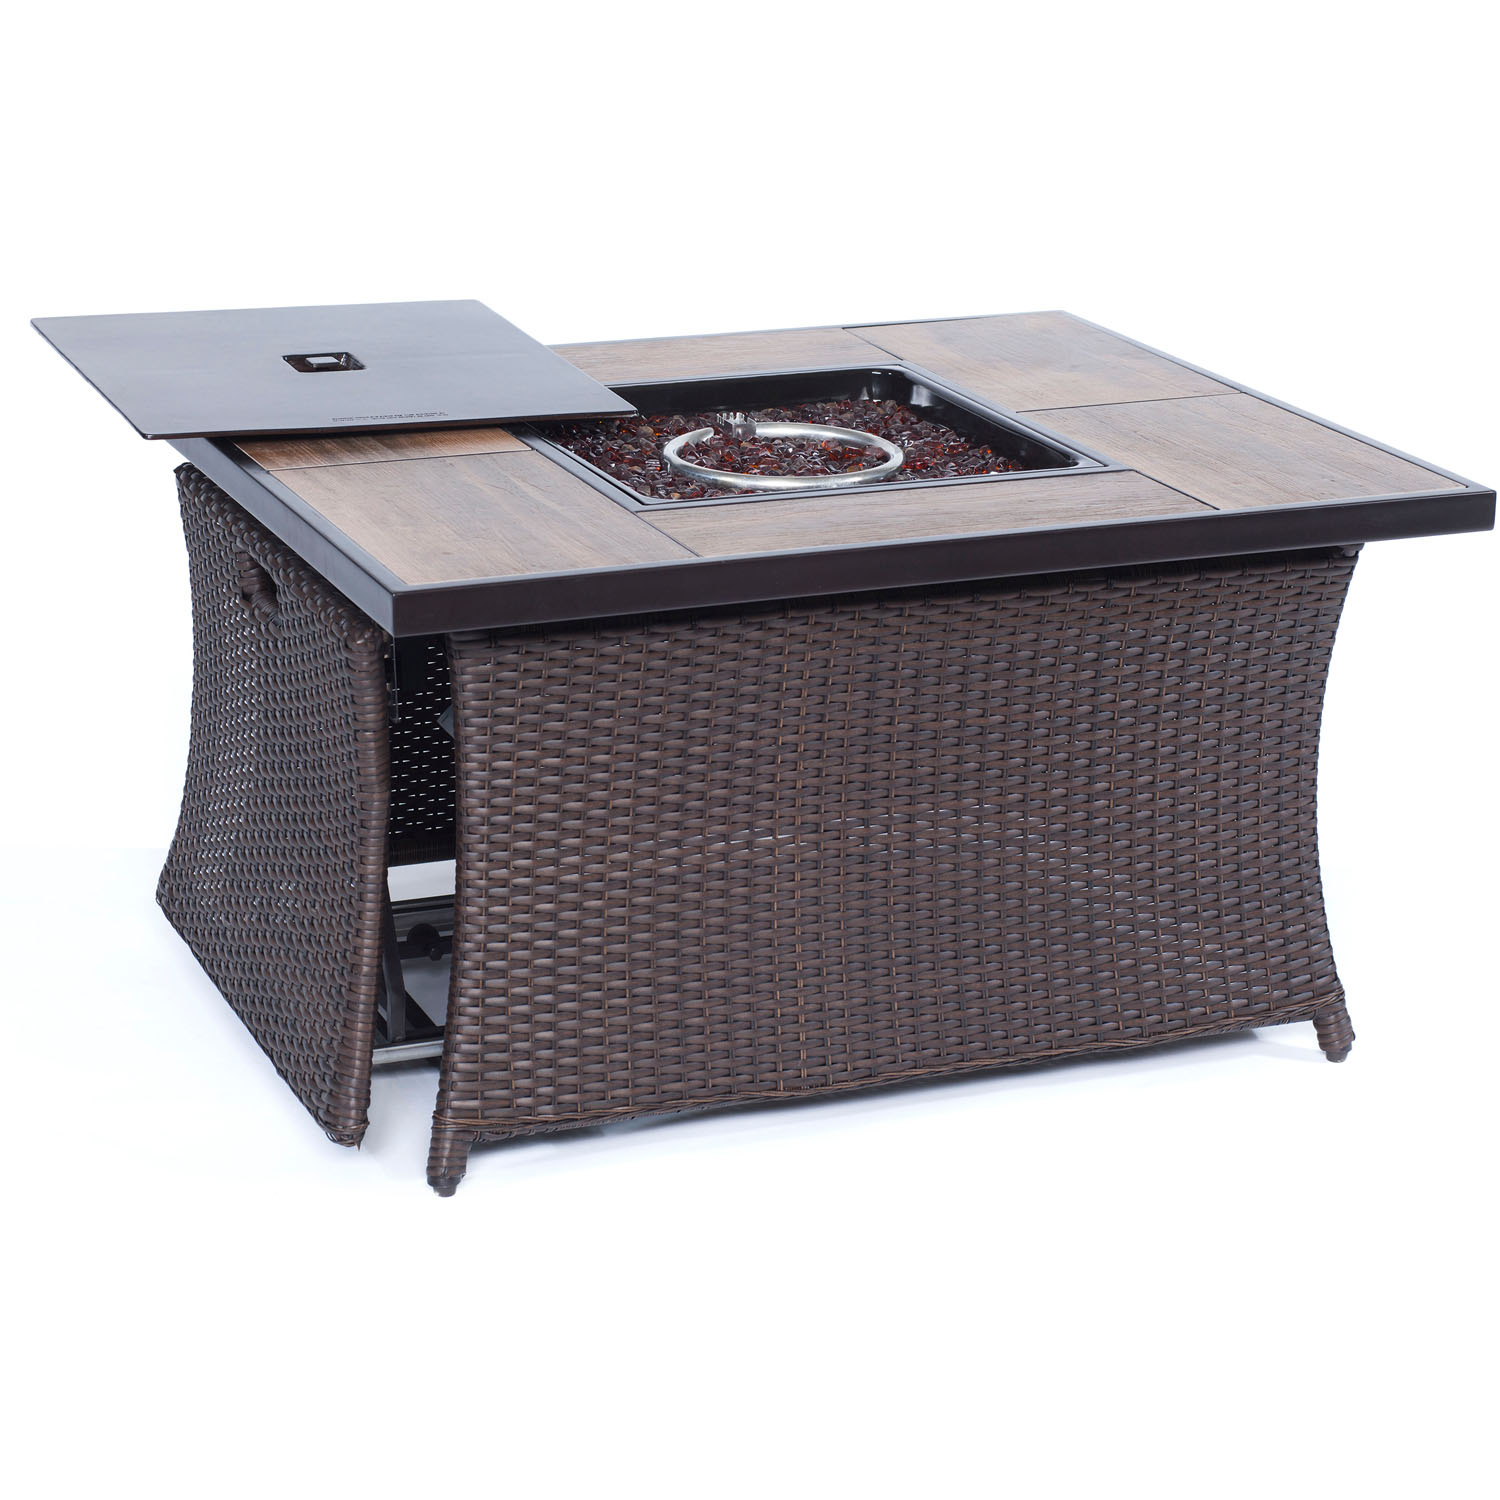 Hanover Ventura 4-Piece Fire Pit Lounge Set with Glazed Faux-Wood Tile Top - image 5 of 11